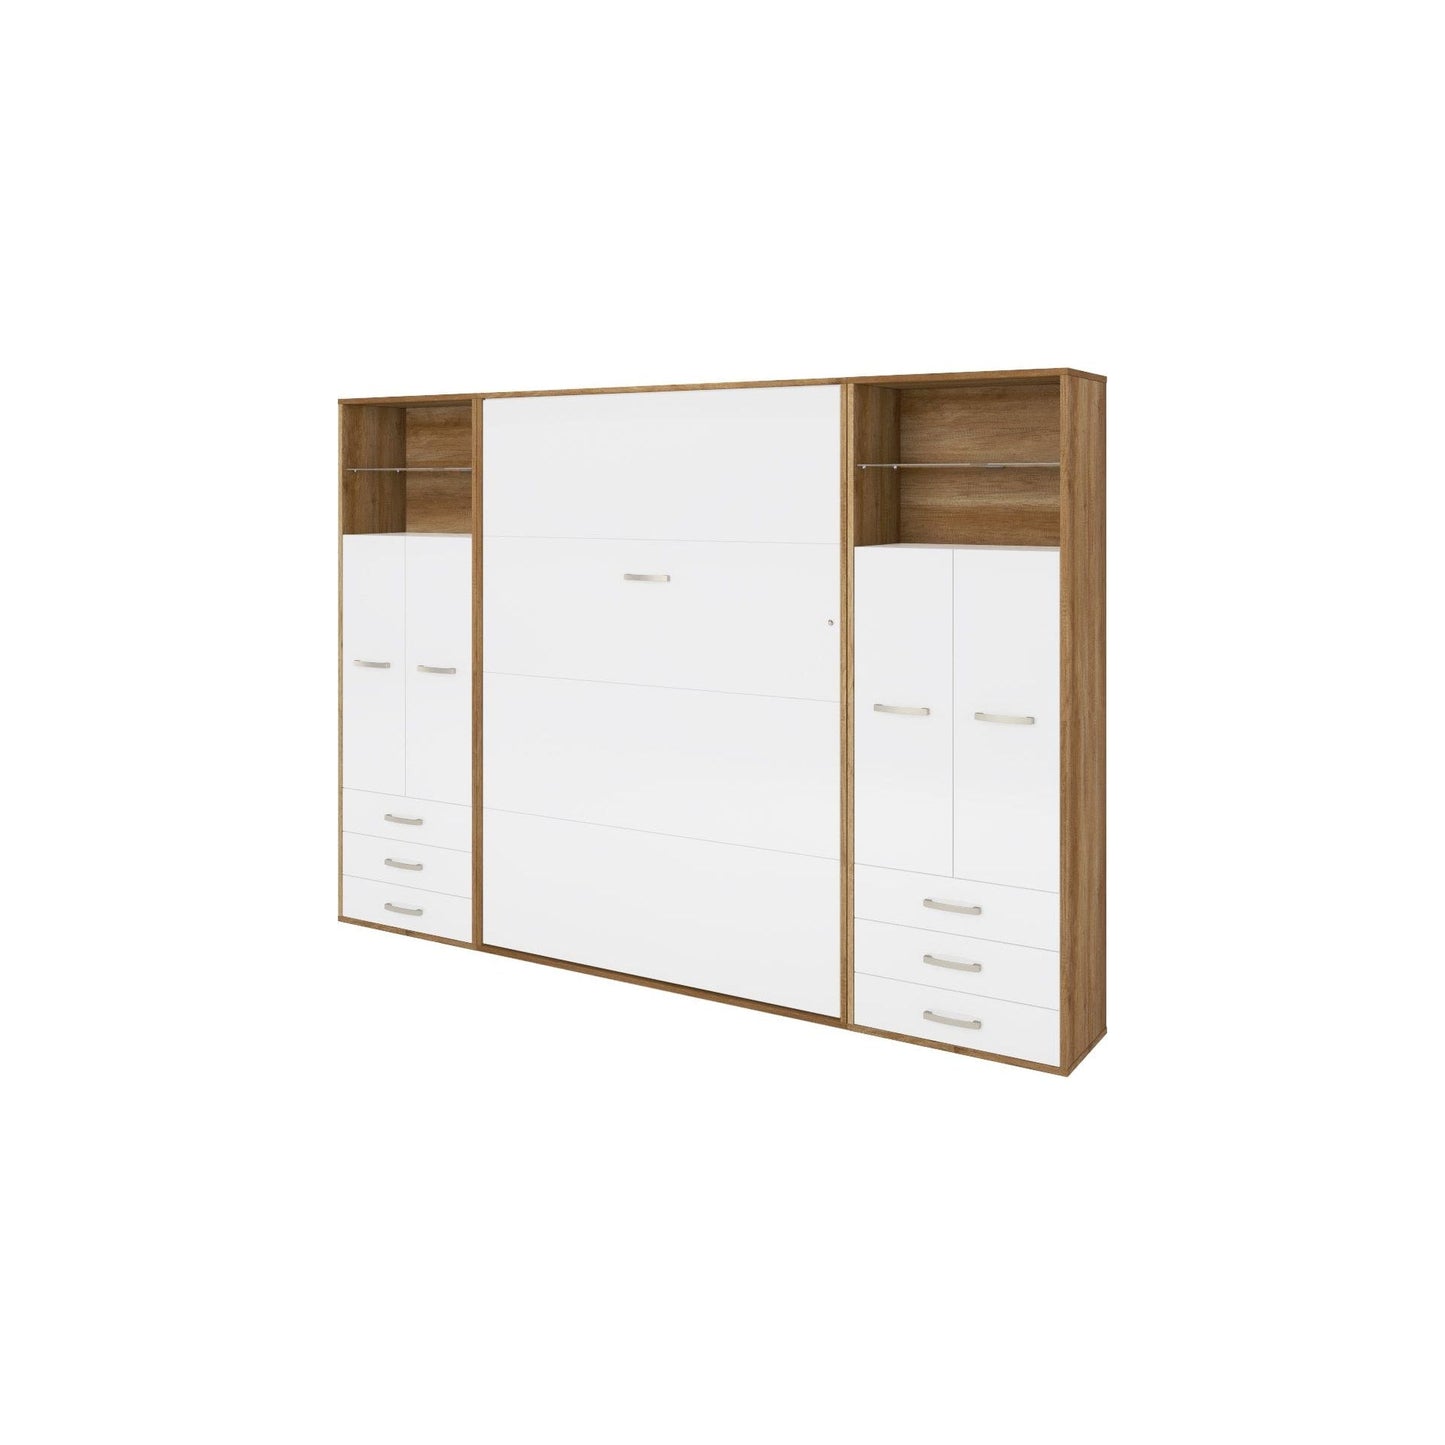 Maxima House Maxima House Vertical Wall Bed Invento, European Twin Size with 2 cabinets Oak Country/White IN90V-10OW